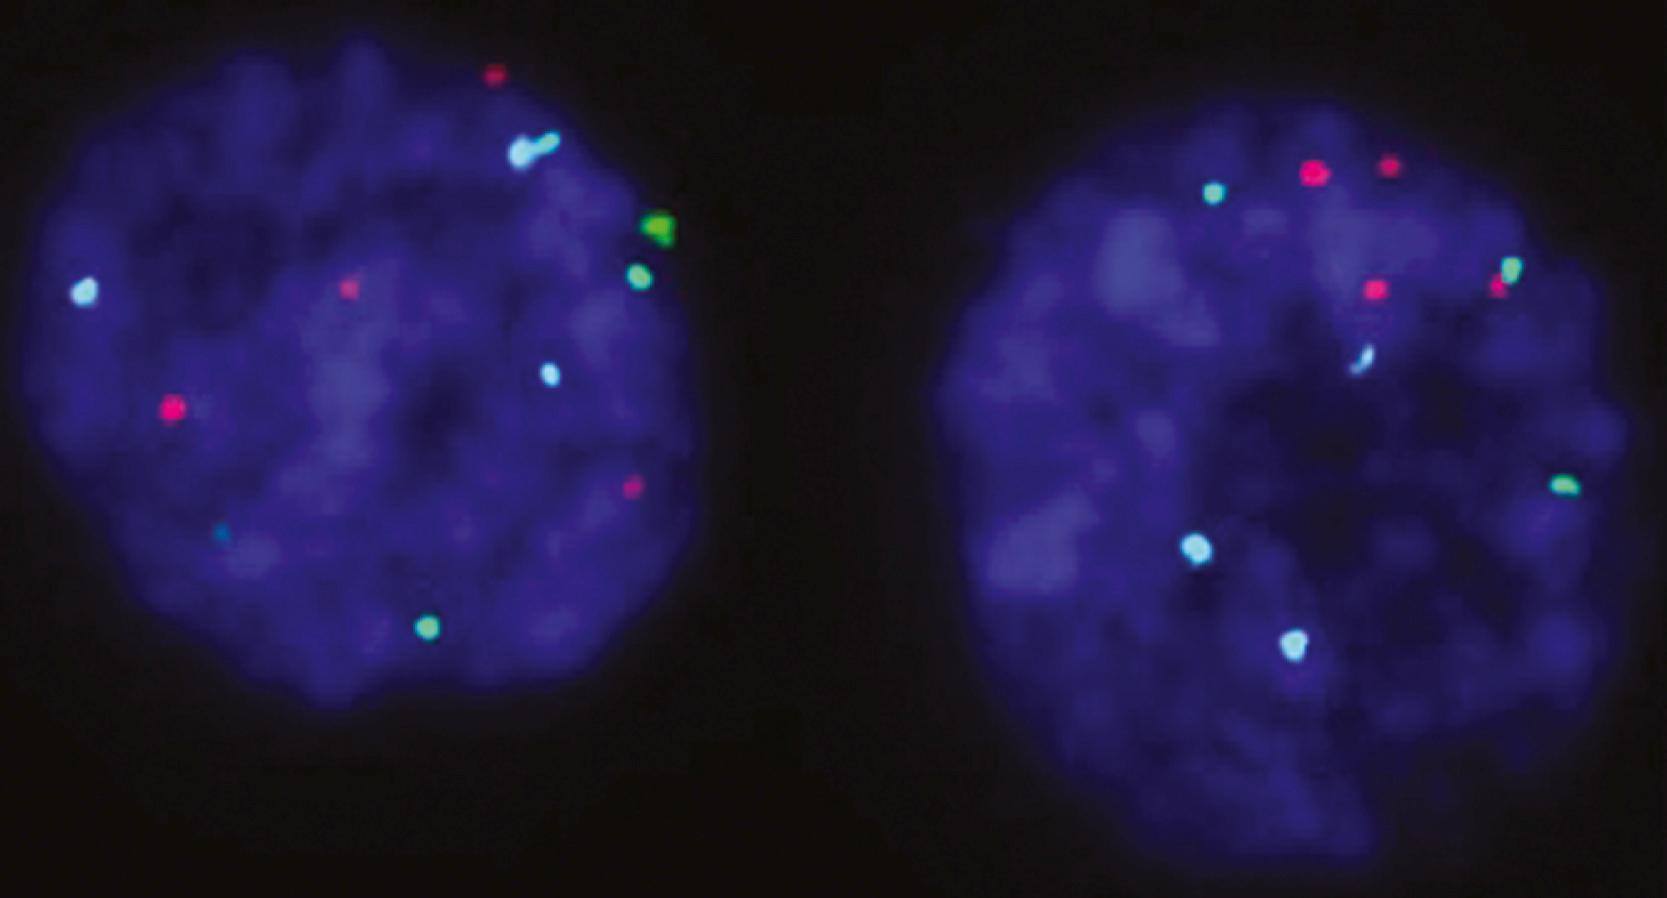 Fig. 17.10, Interphase fluorescence in situ hybridization urine cytology analysis by using Vysis UroVysion probe sets (Abbott Molecular, Abbott Park, IL) for chromosomes 3q (red) , 7p (green) , and 17q (aqua) and 9p21 deletions (p16 locus: gold ). Note polysomy for 17q (aqua) and deletion of 9p21 loci (absence of gold signals) in two urothelial carcinoma cells.